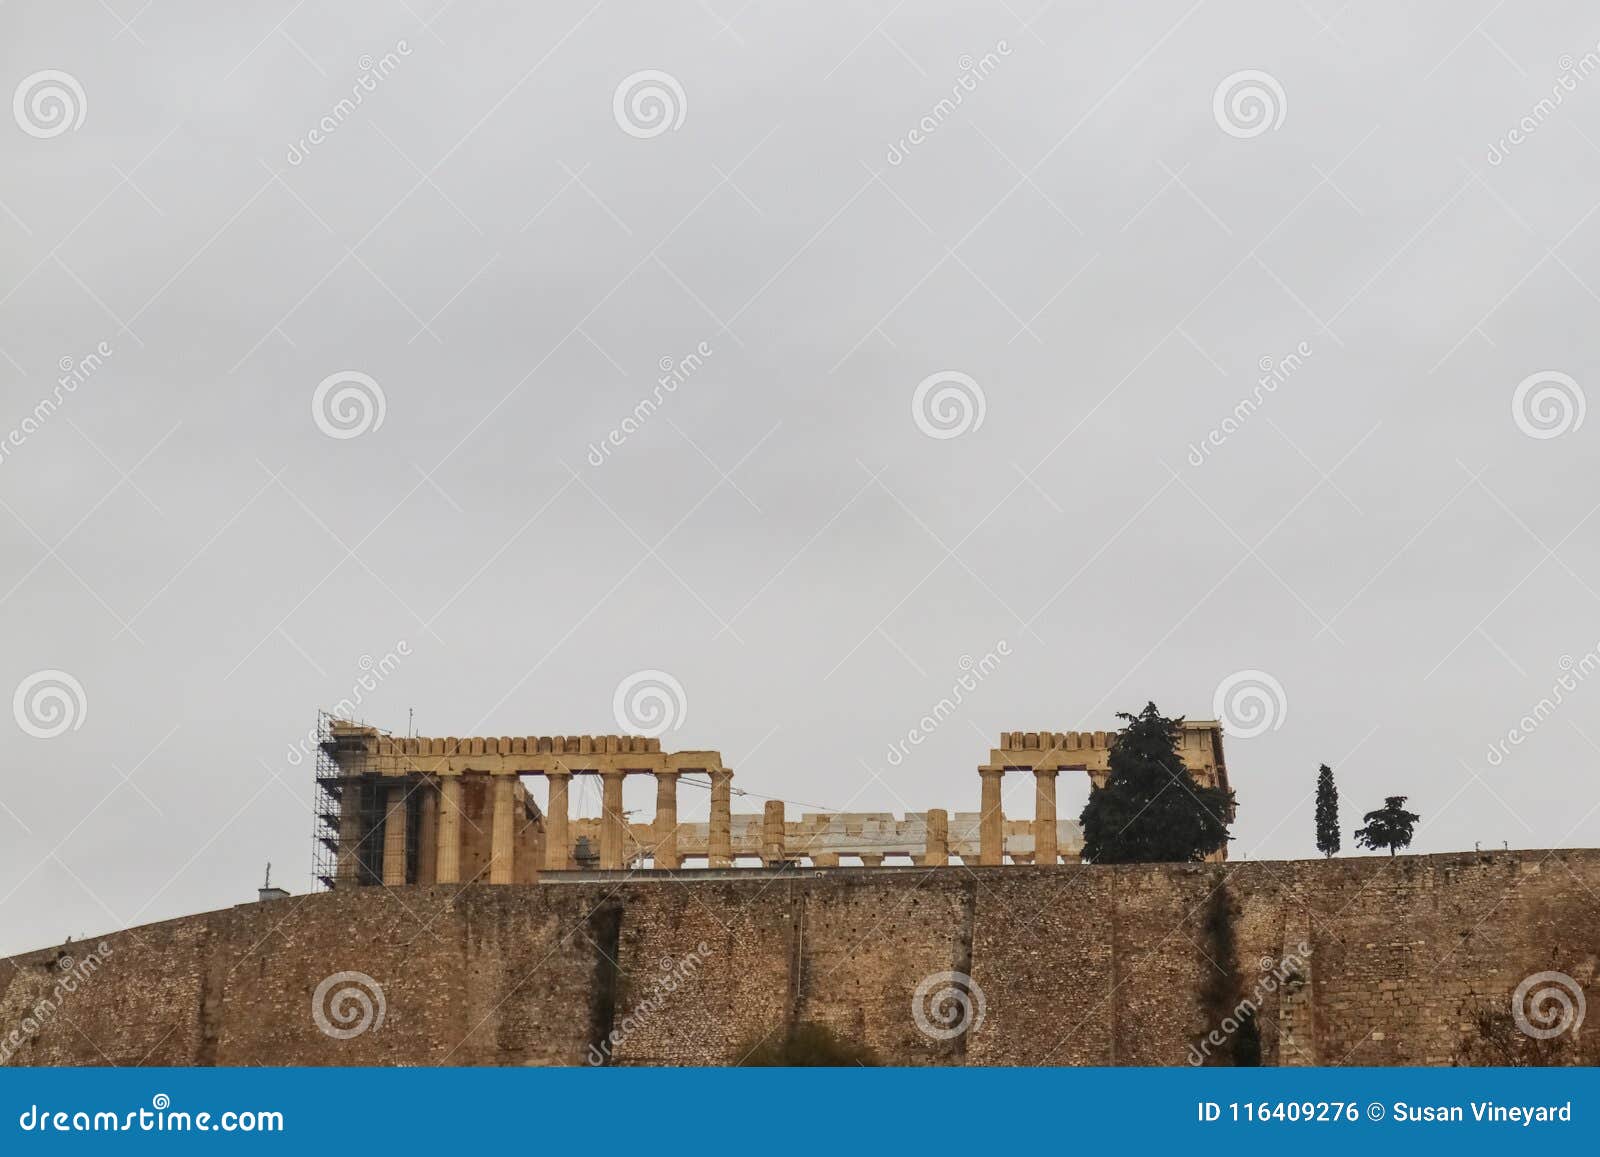 view of partenon on acropolis above retaining wall outlined against a grey sky from acropolis museum - room for copy